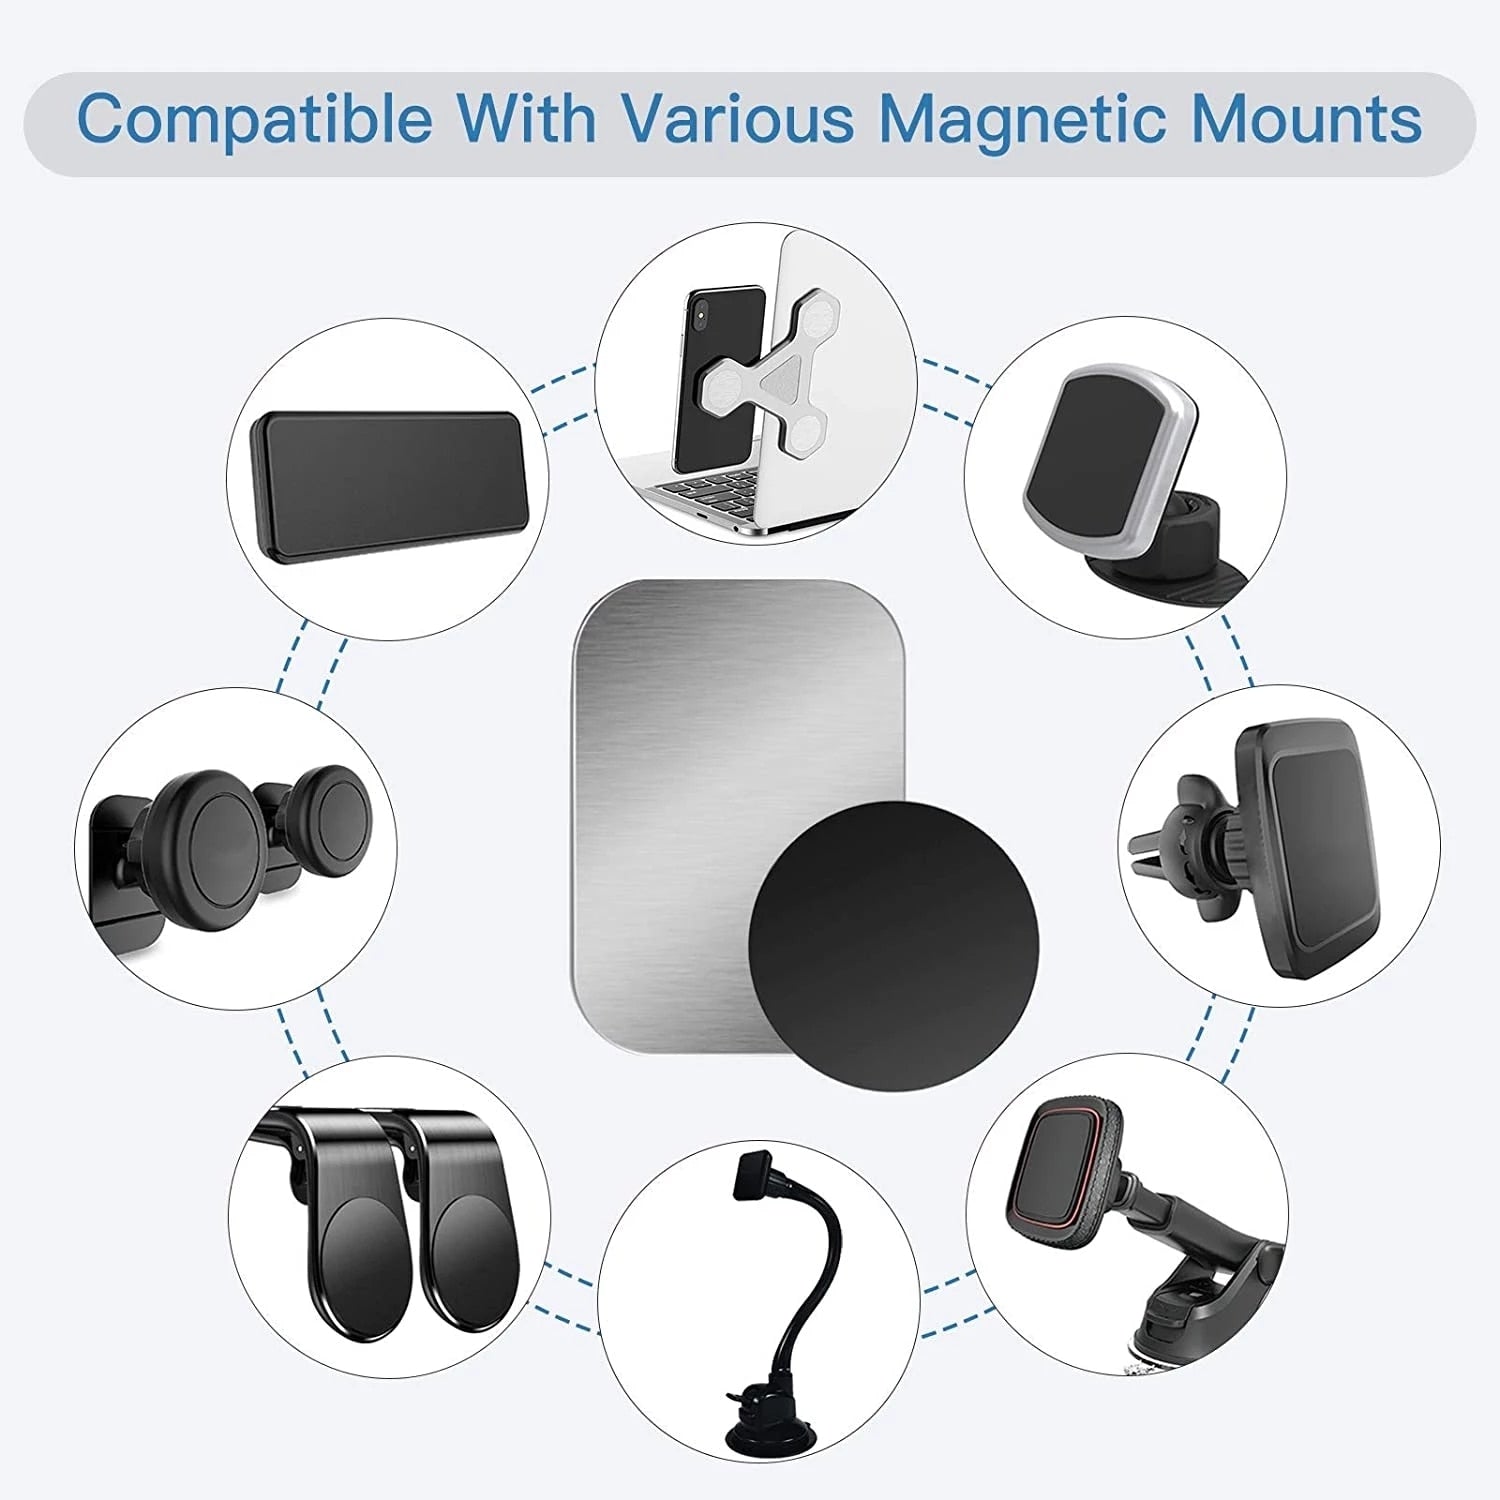 Thin Metal Plate For Magnetic Car Phone Holder Iron Sheet Sticker Disk For Magnet Tablet Desk Cell Phone Car Stand Mount Round